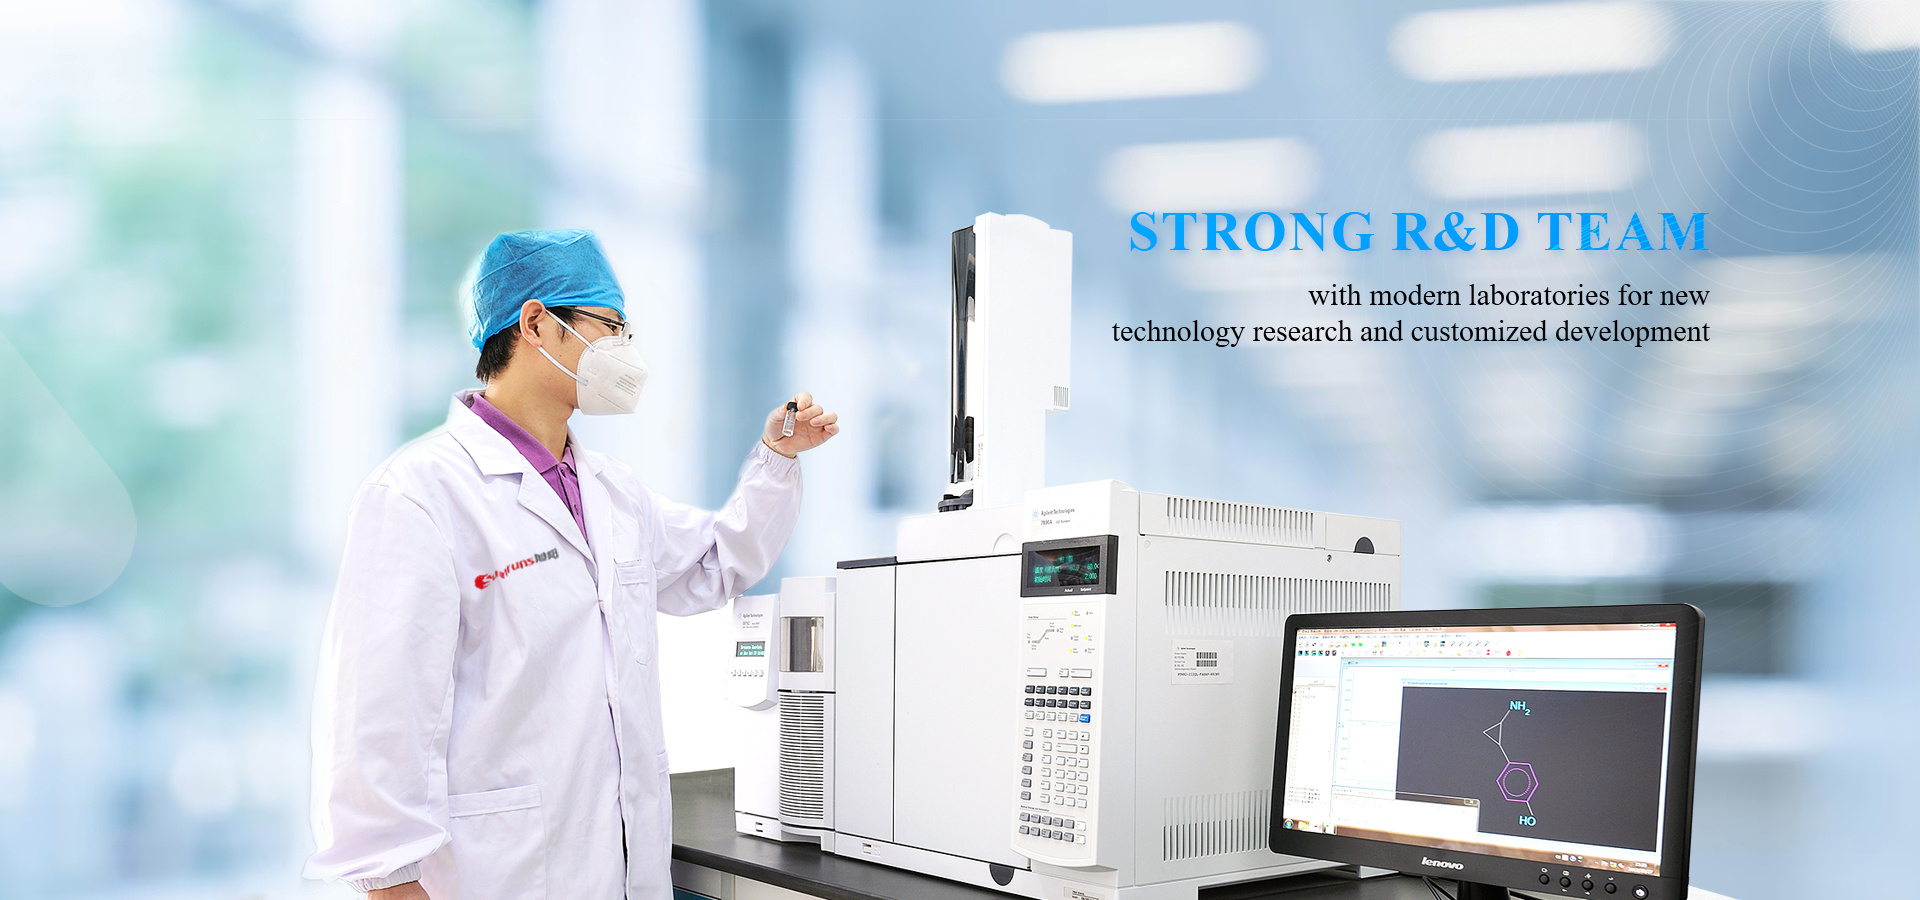 Strong R&D team with modern laboratories for new technology research and customized development